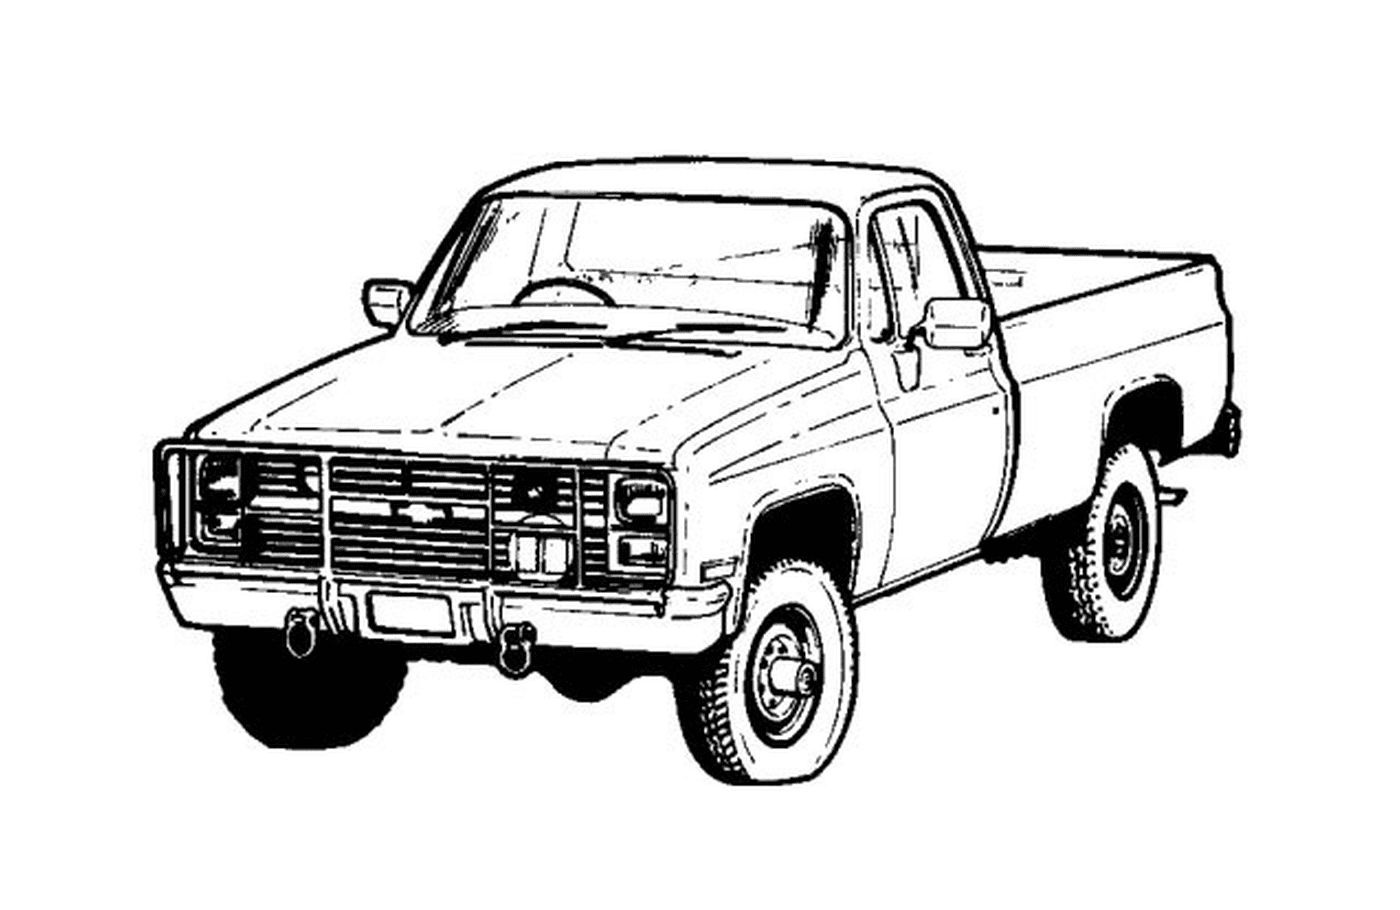  Pickup truck in a drawing 